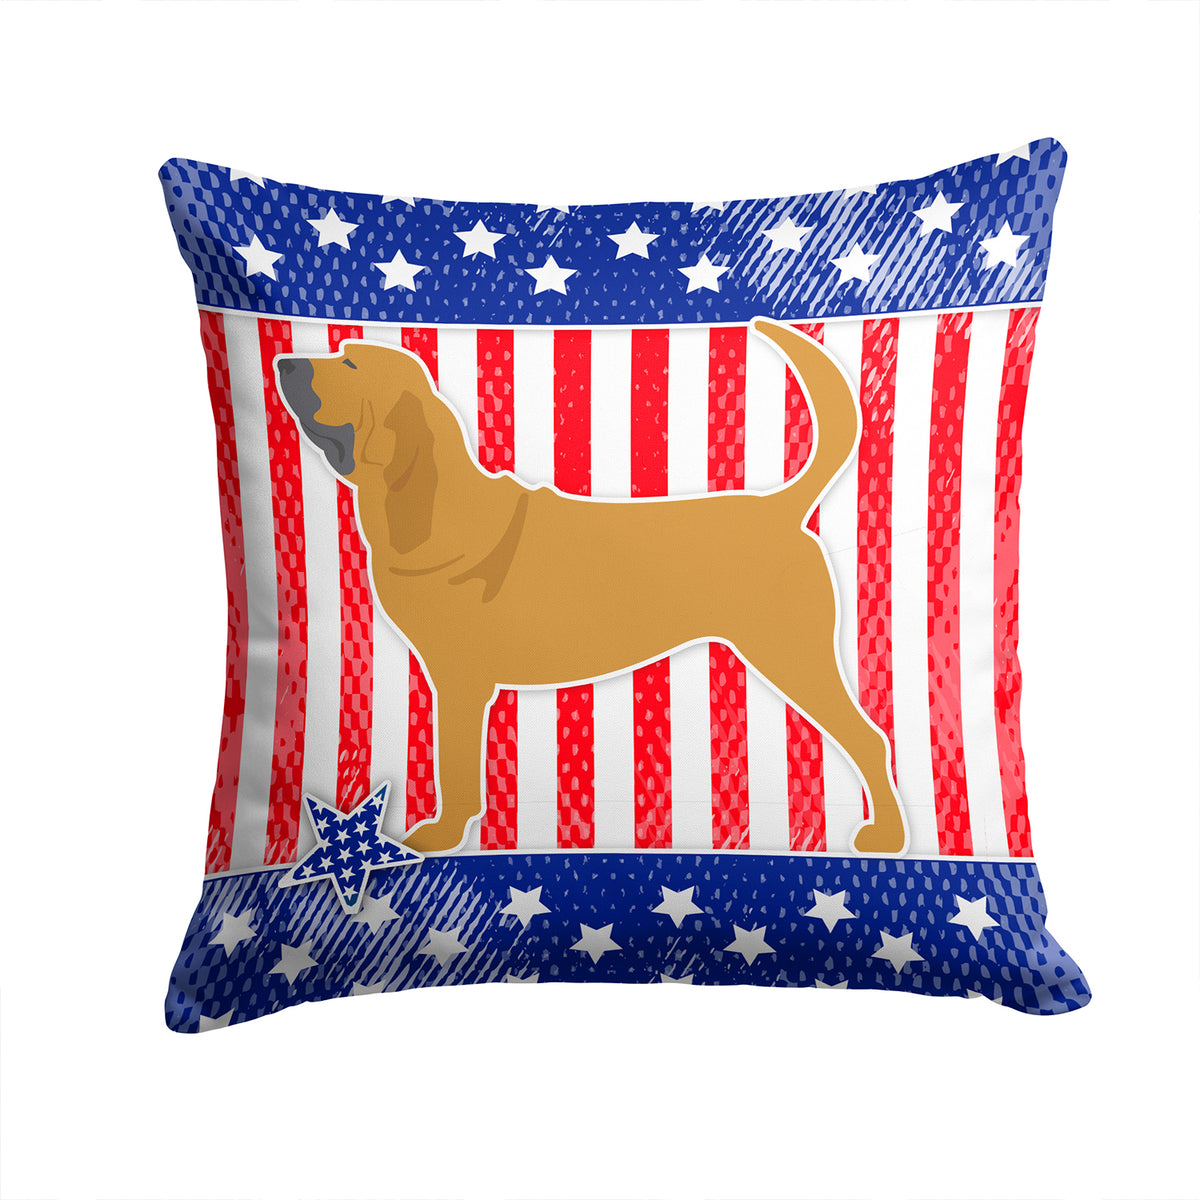 USA Patriotic Bloodhound Fabric Decorative Pillow BB3284PW1414 - the-store.com